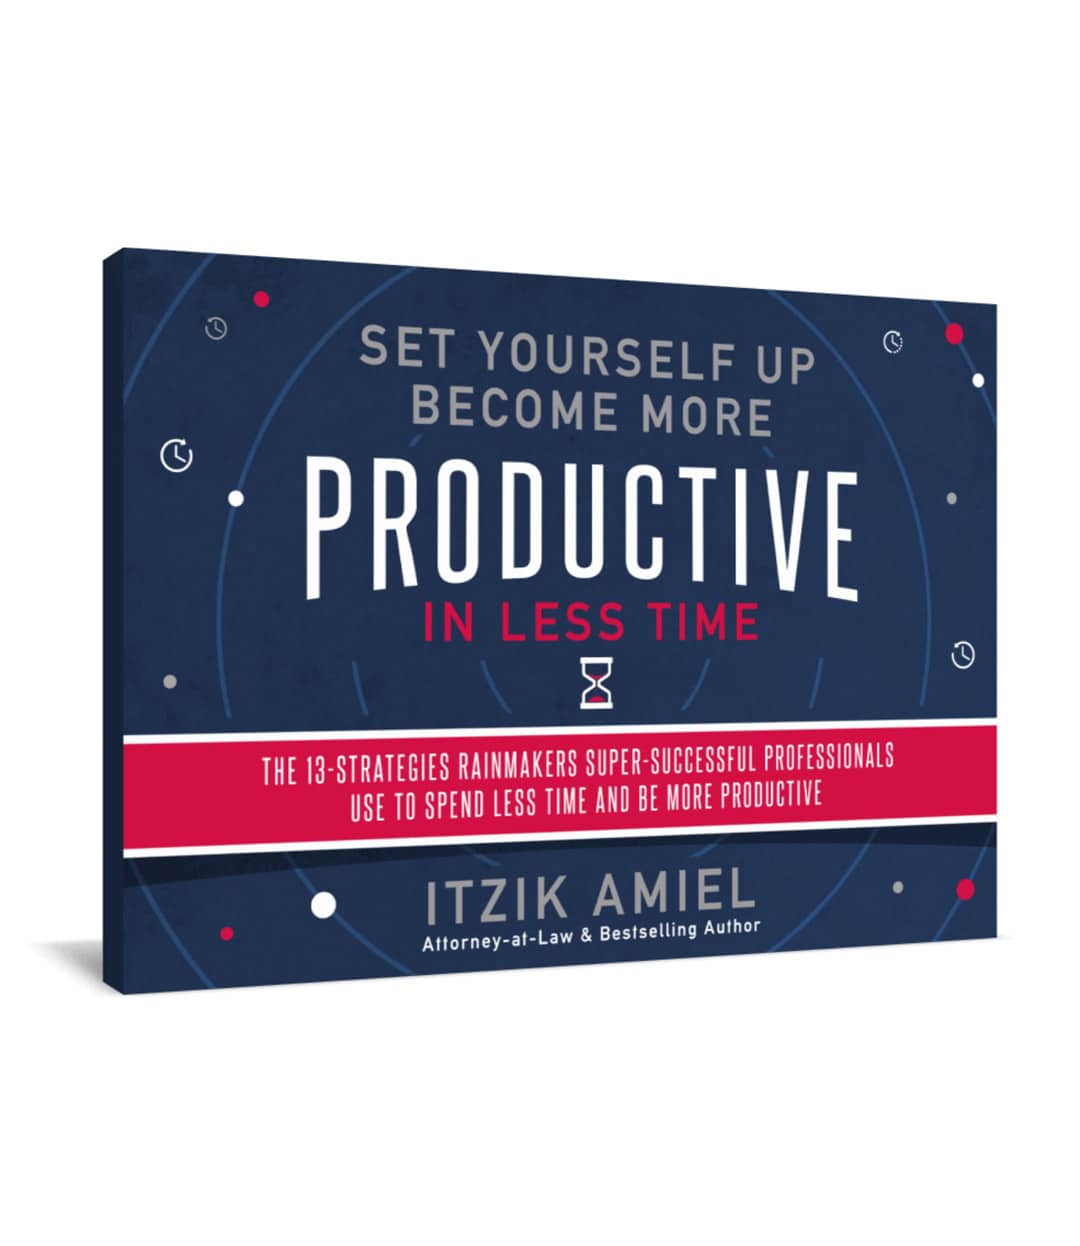 Image of a book about Become More Productive in Less Time by Itzik Amiel